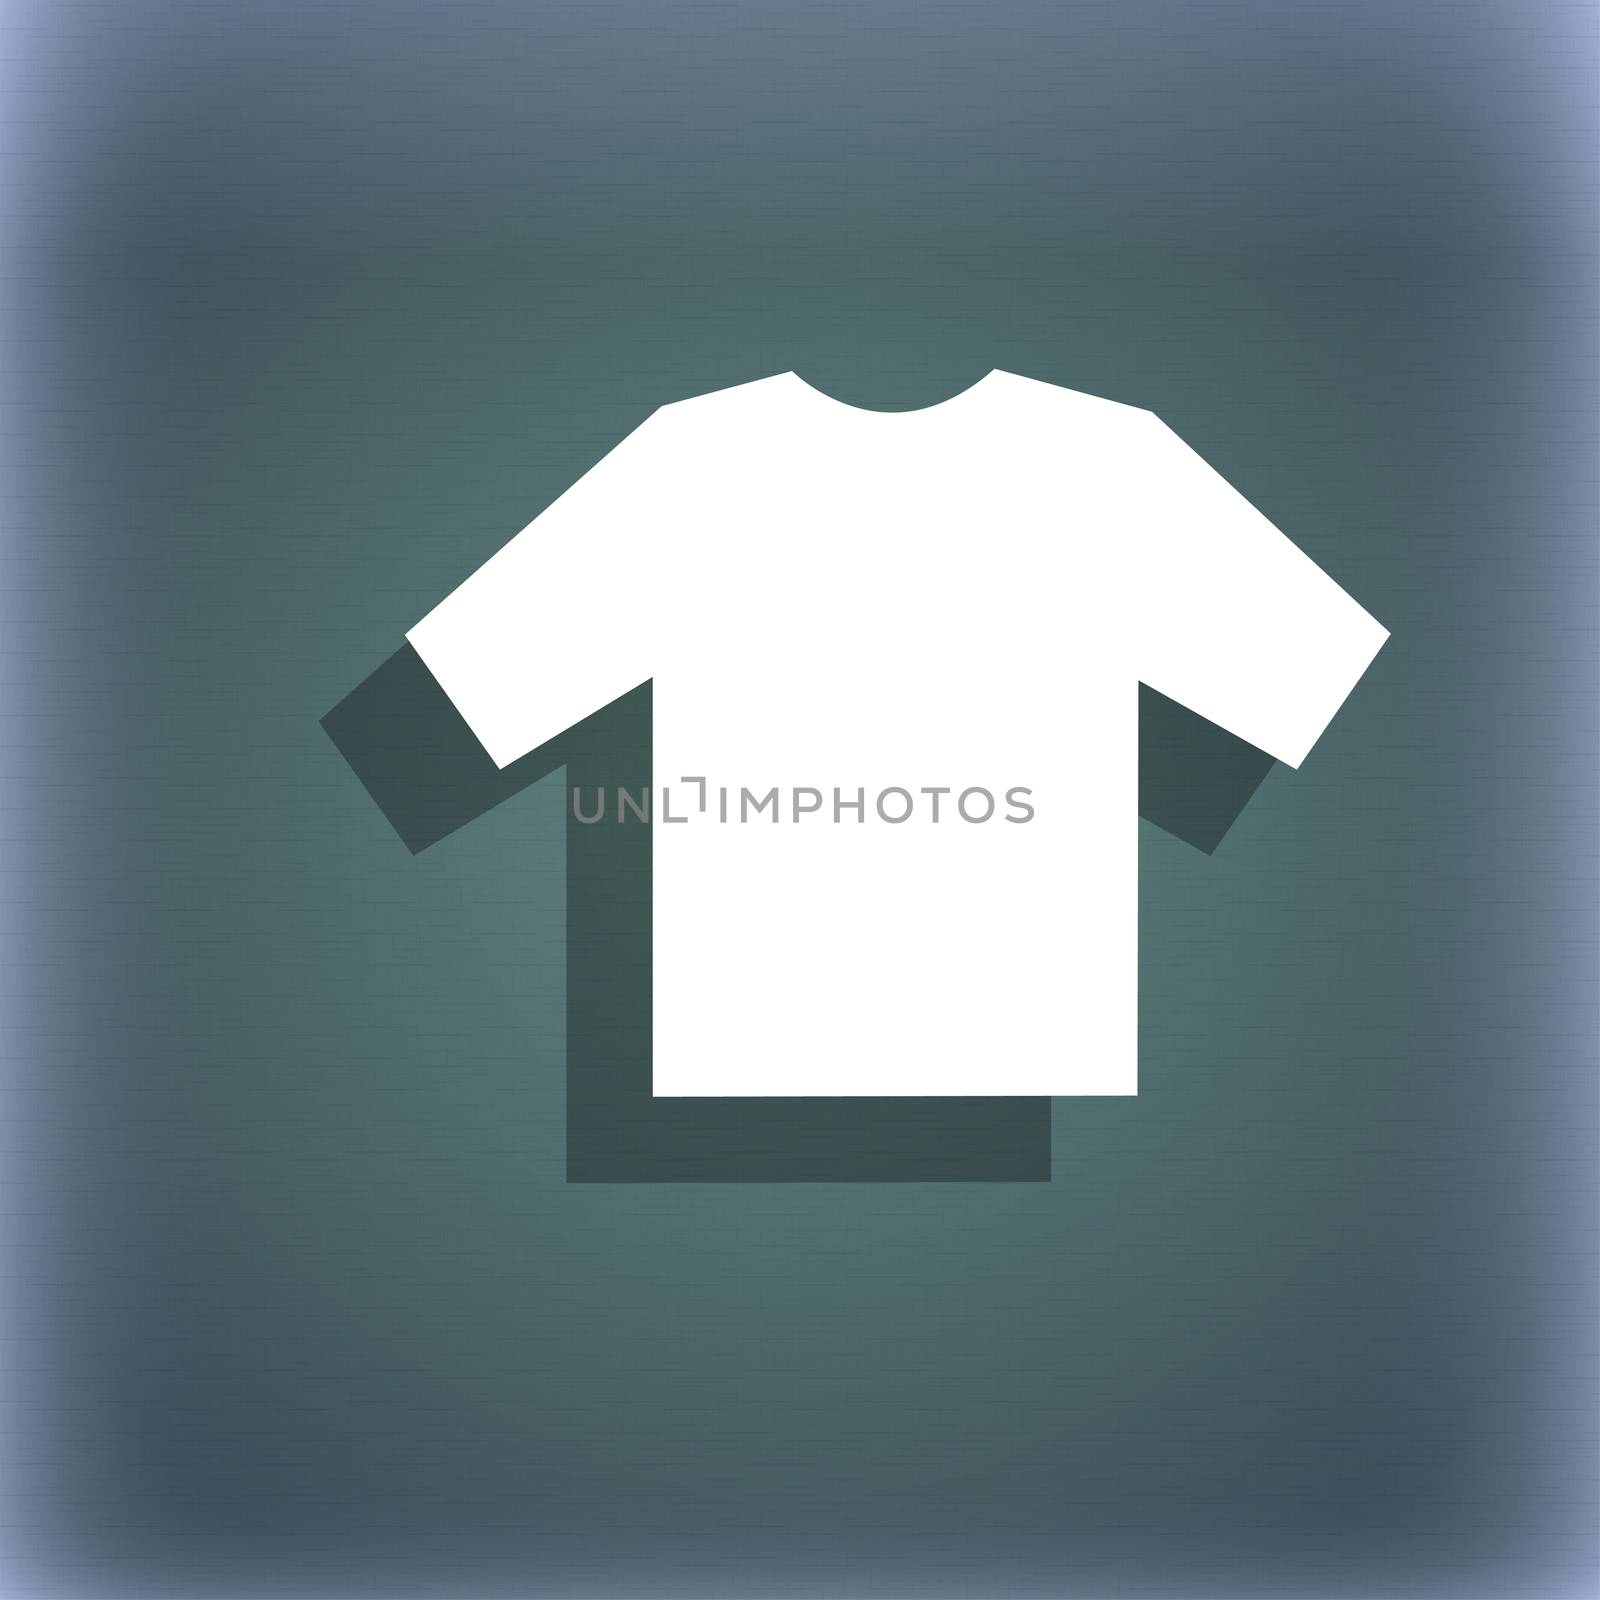 t-shirt icon symbol on the blue-green abstract background with shadow and space for your text. illustration